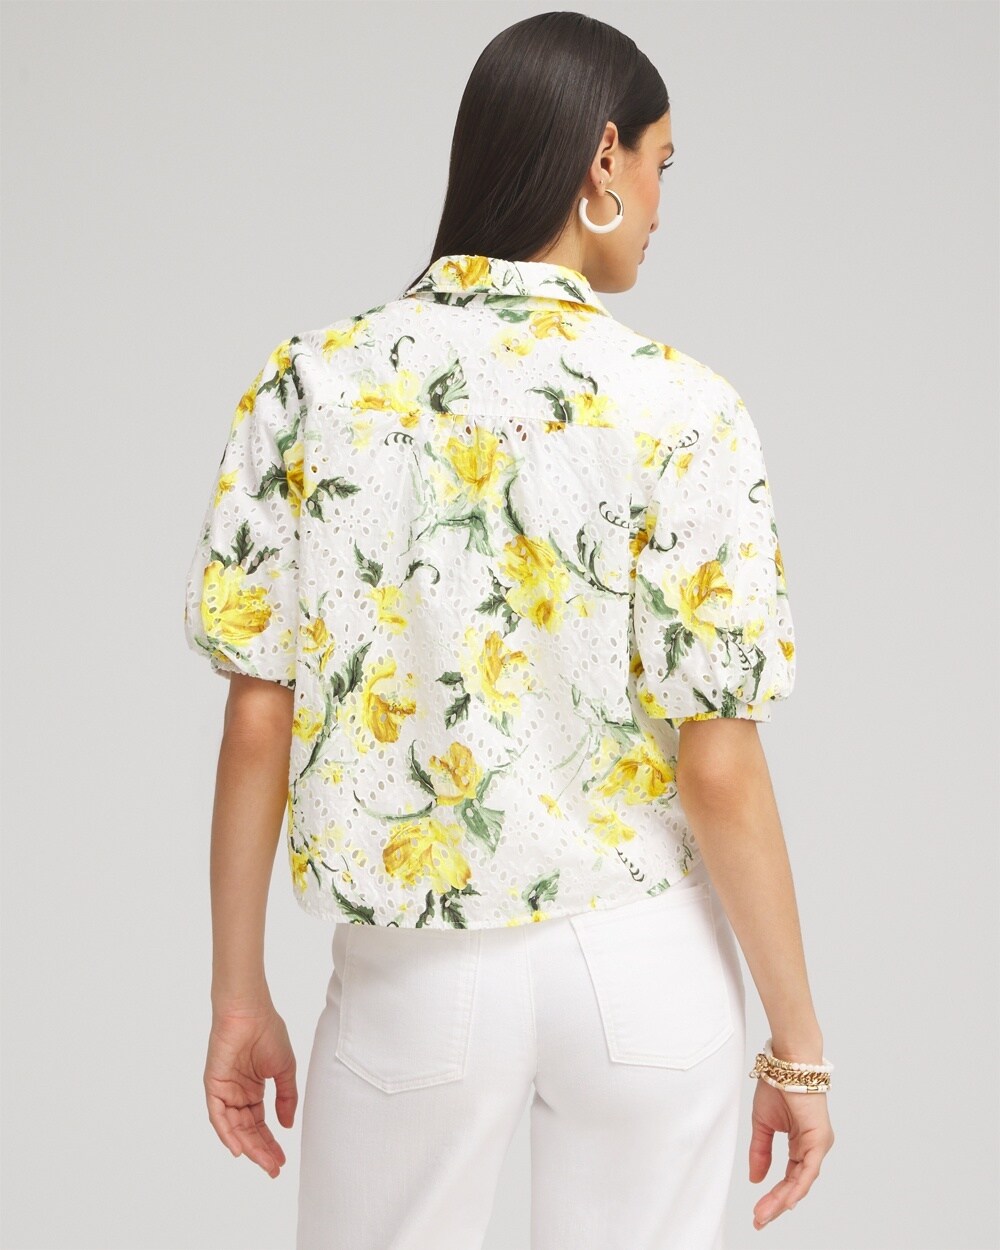 Floral Eyelet Shirt - Chico's